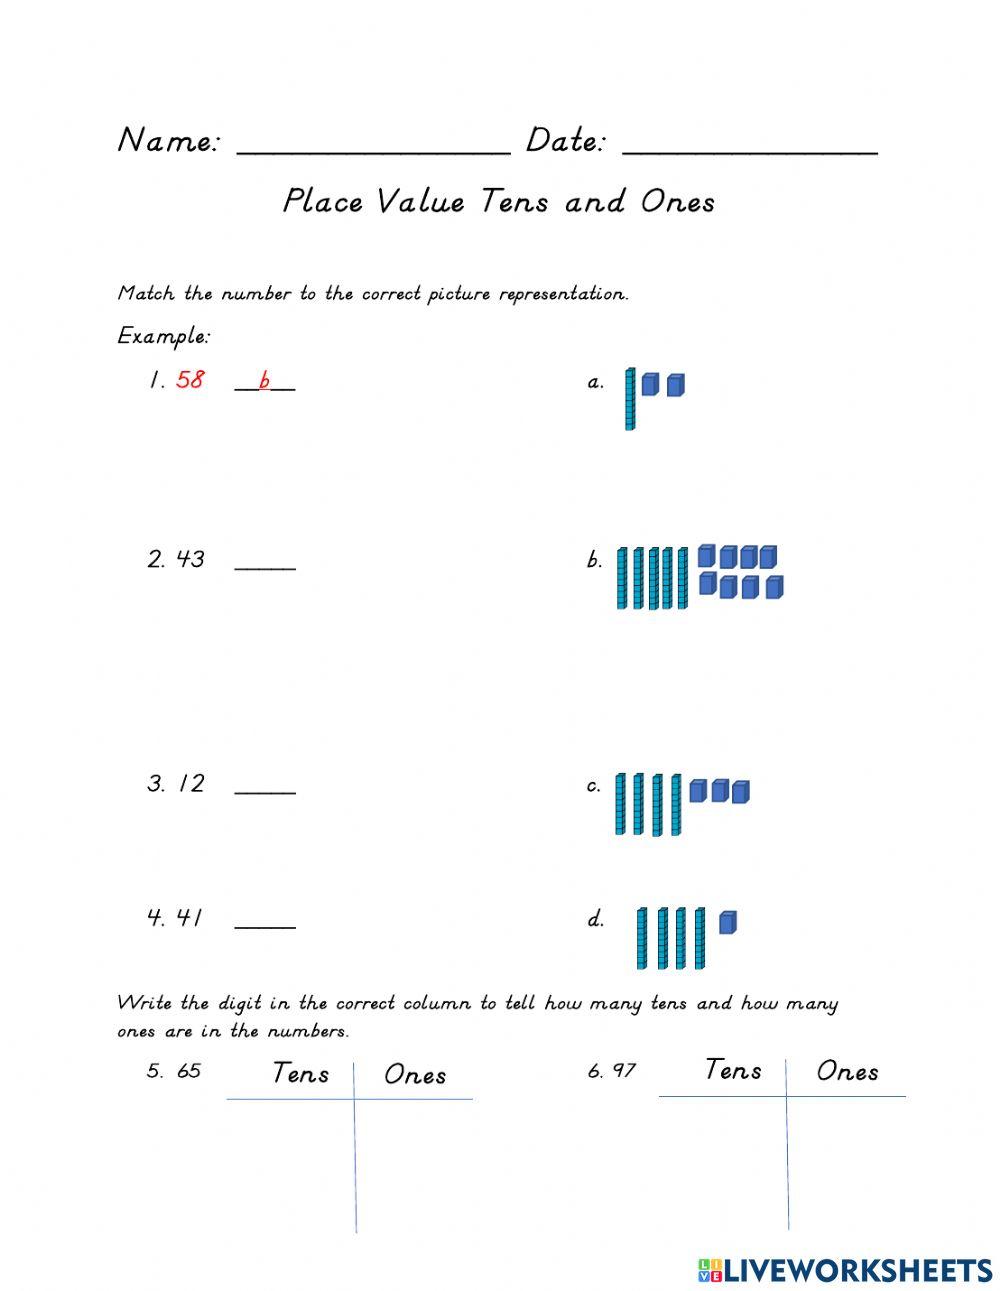 Place Value Tens and Ones 3